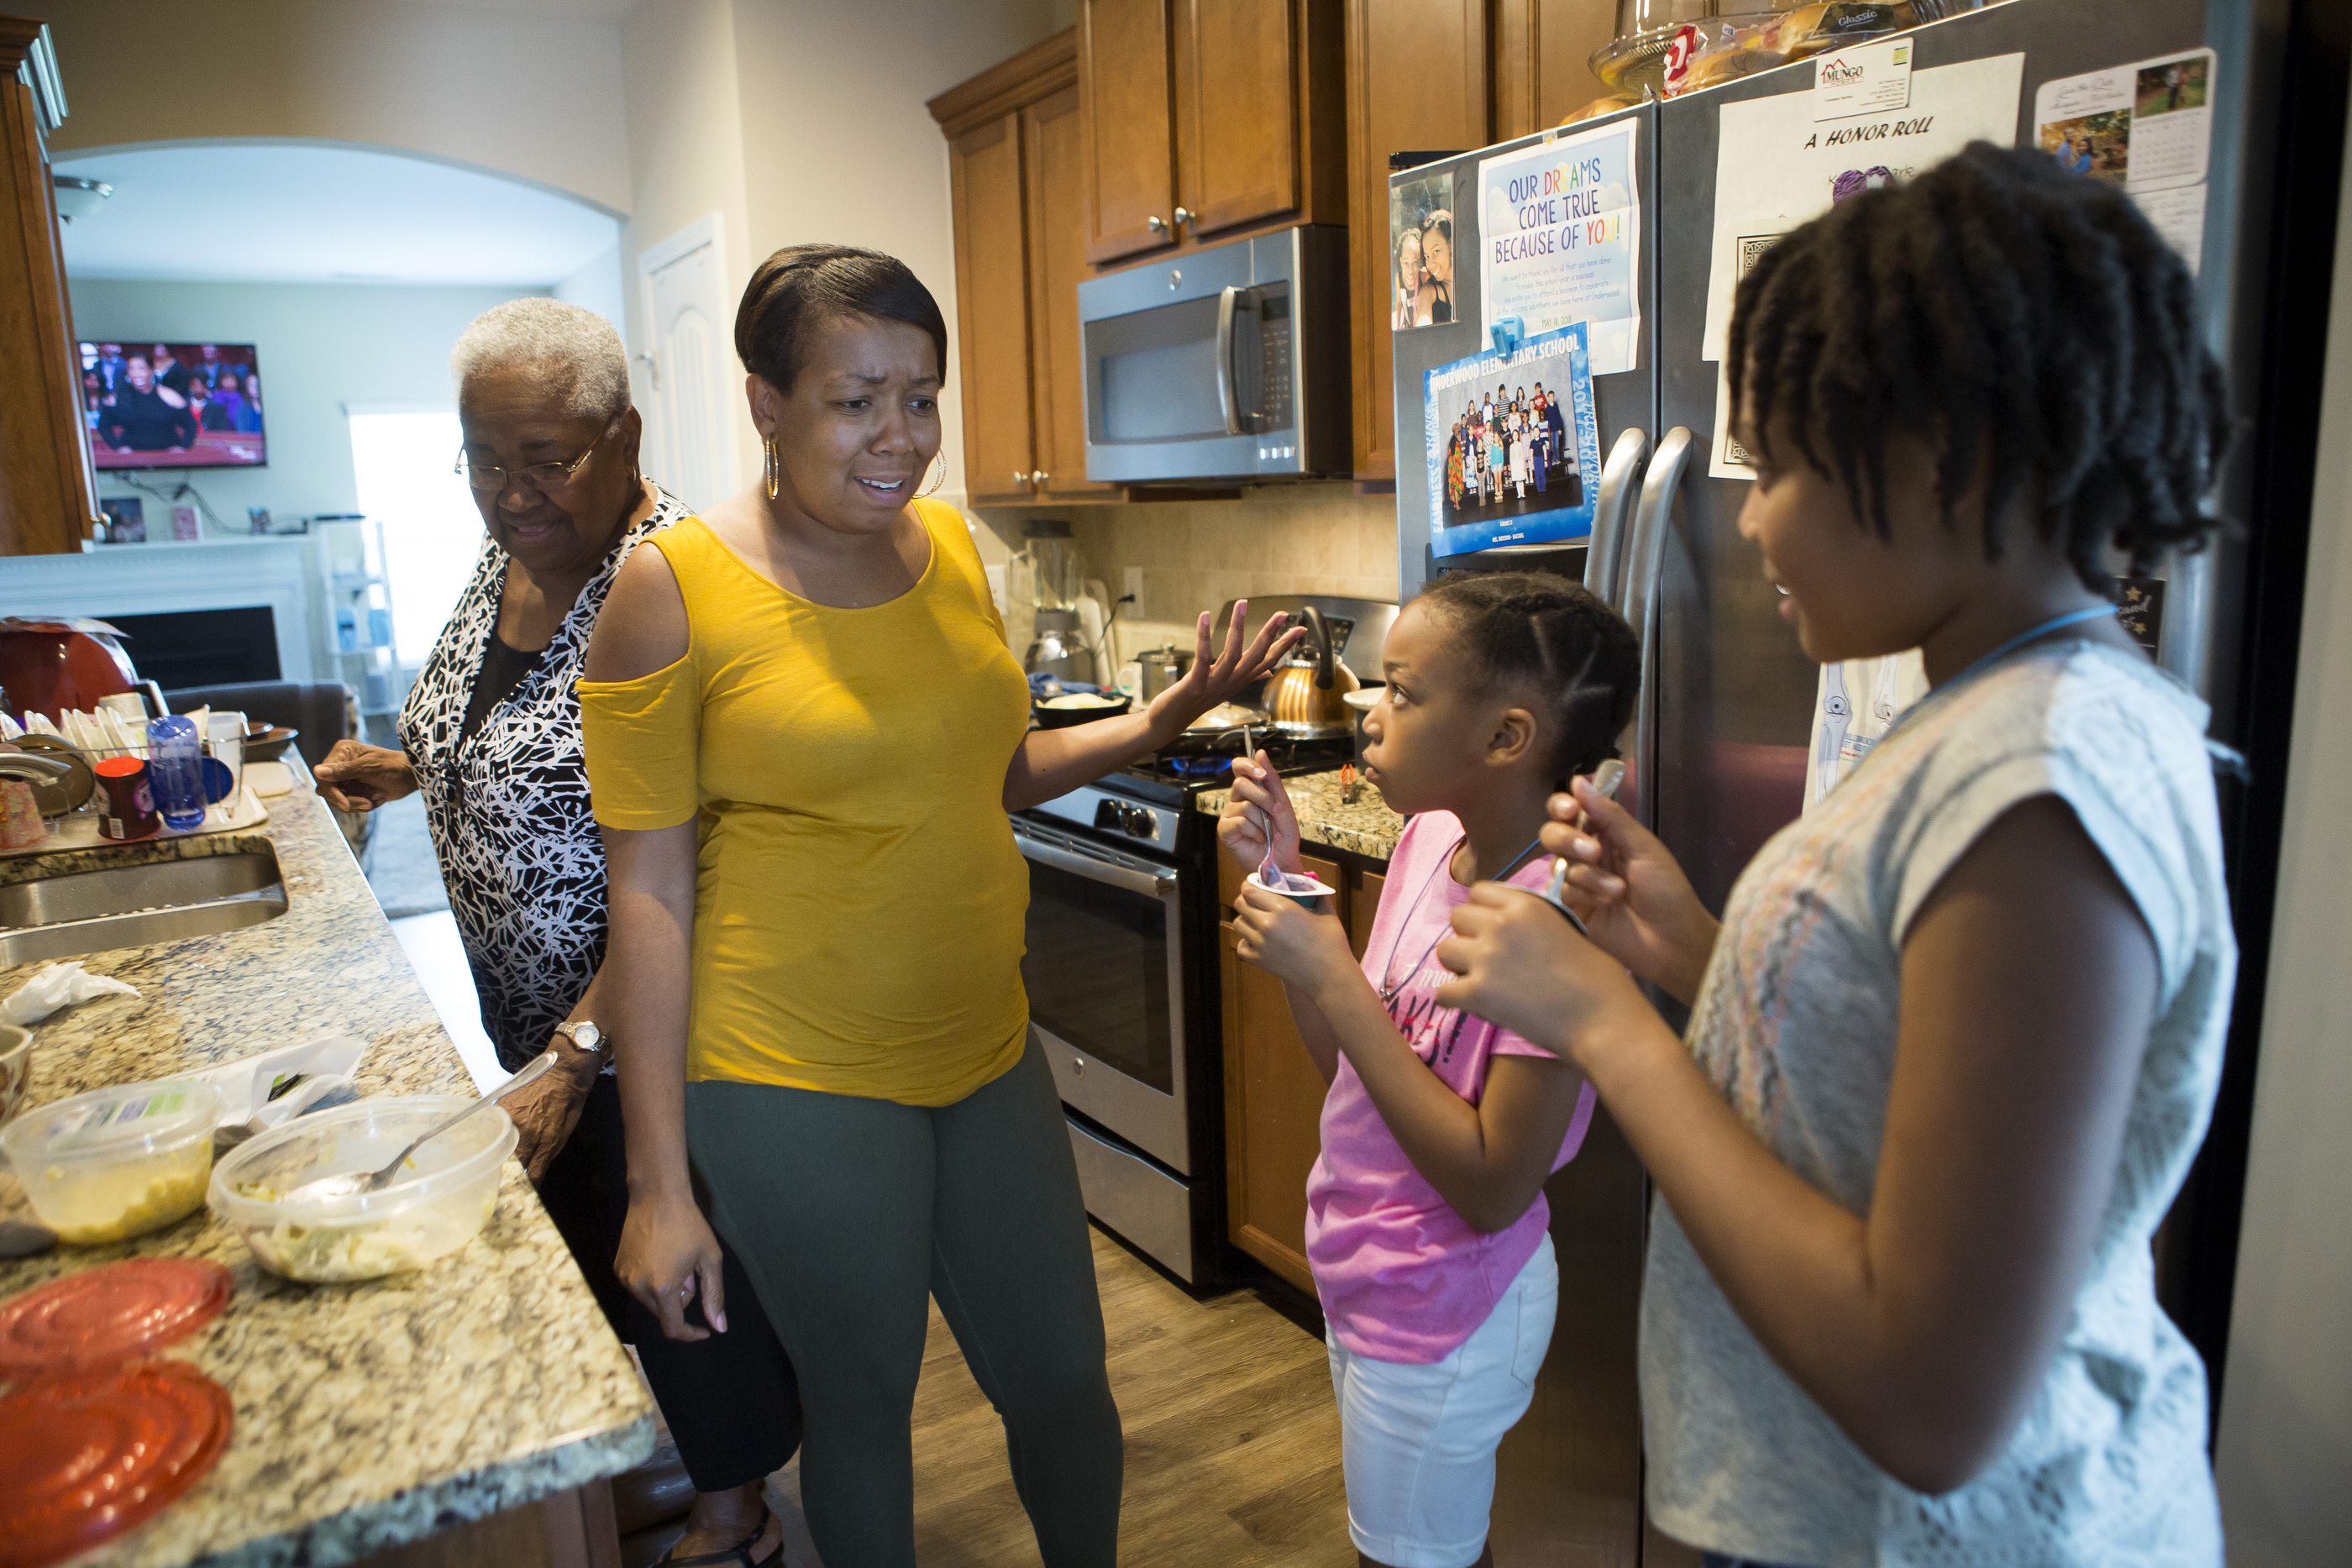 Ayeisha Owens gives her daughters Karisma and Kaiden a hard time for eating yogurt right before dinner. She had just picked them up on their last day of school. Her great grandmother, left, lives with the family and helps care for the girls.